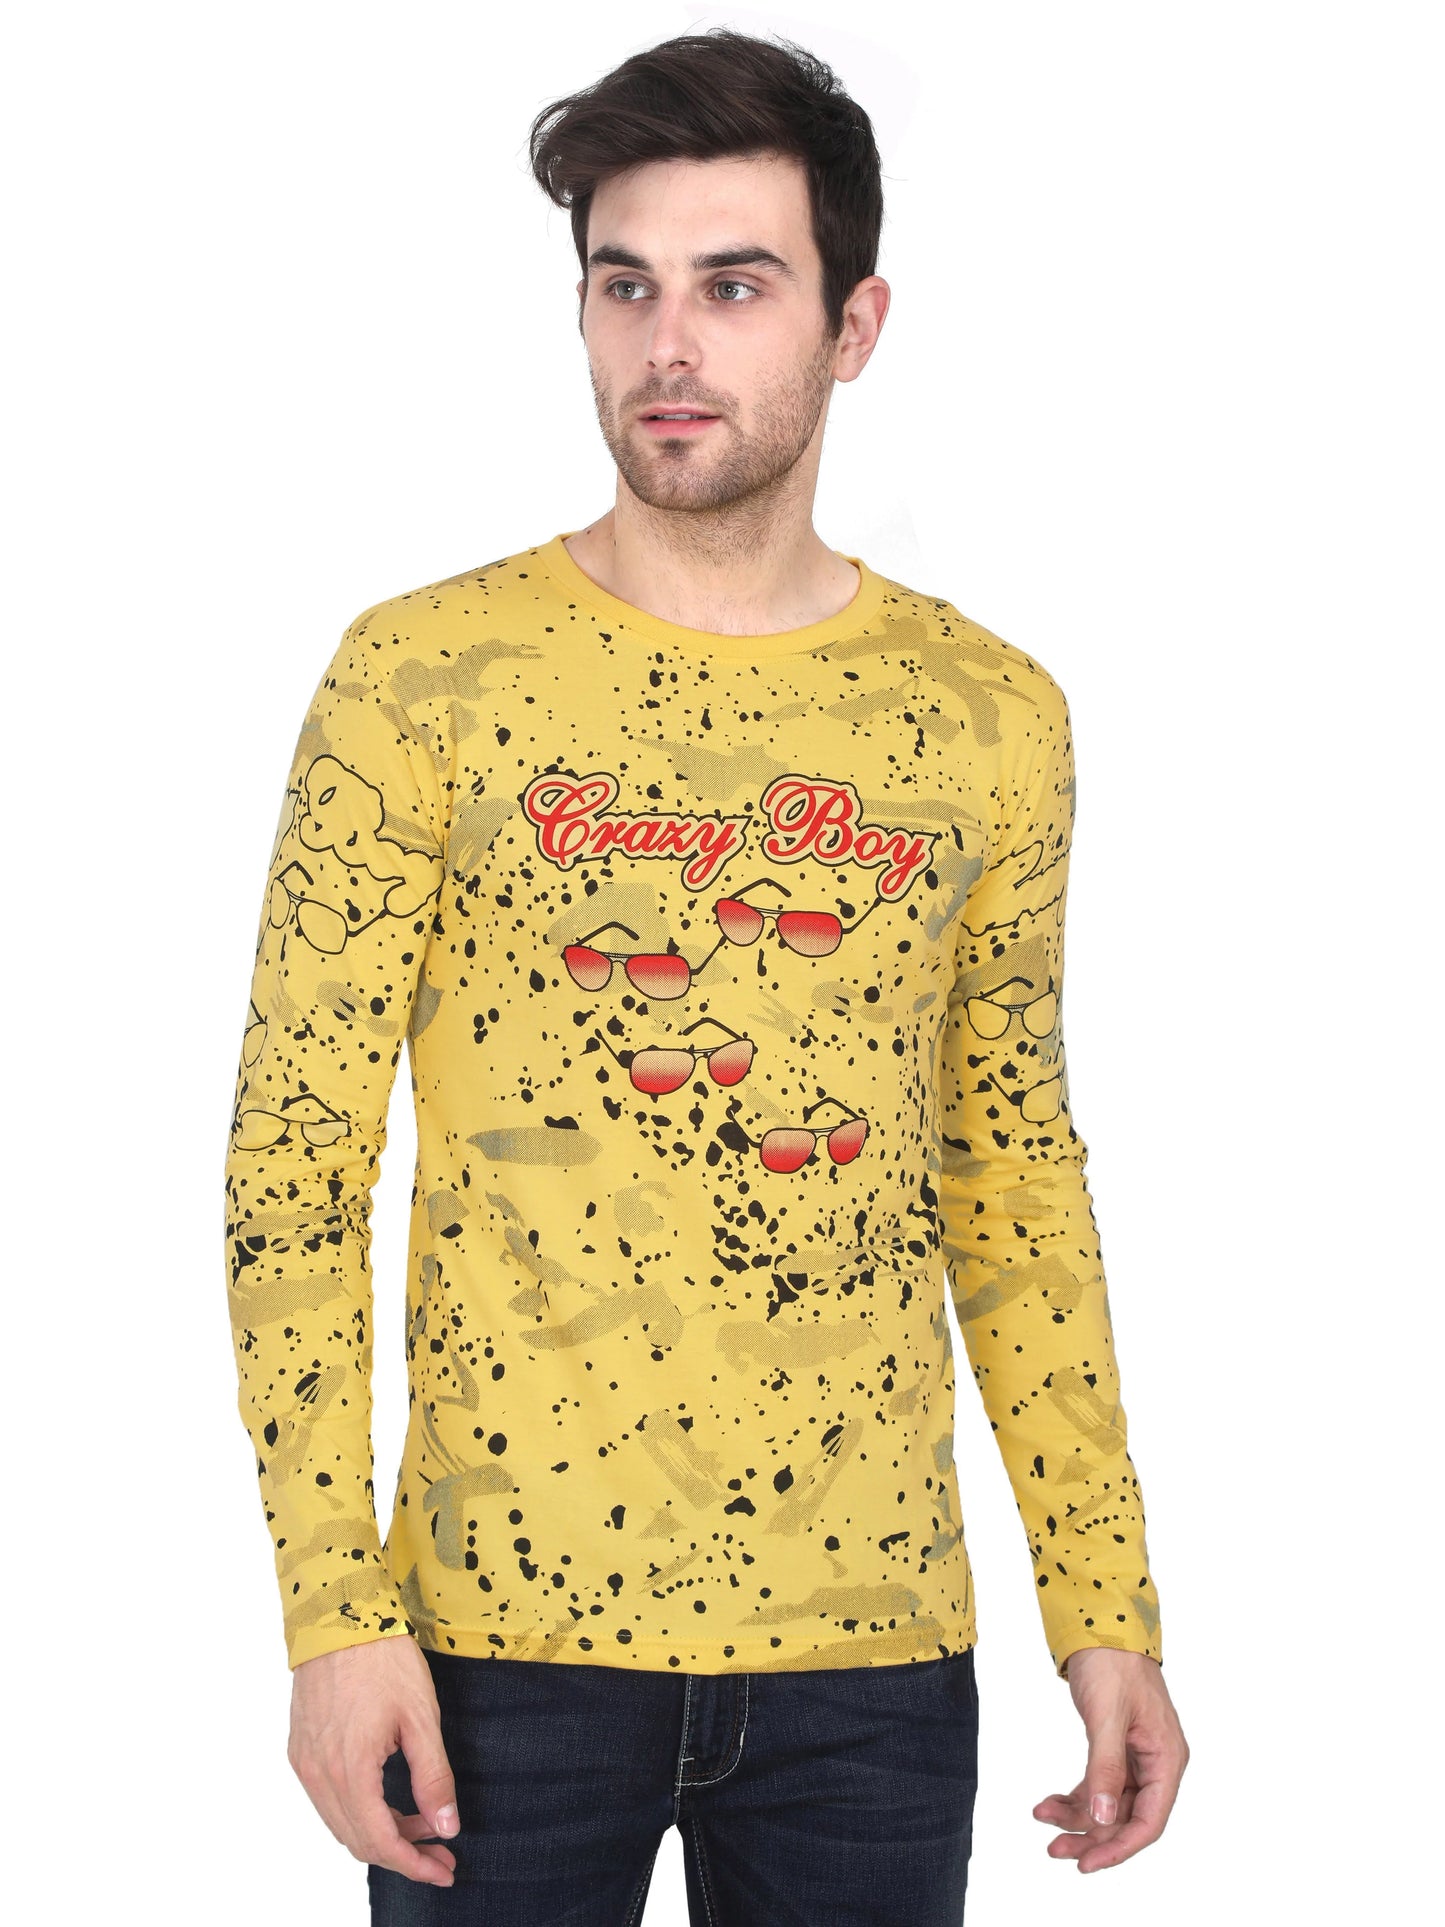 Men's Cotton Round Neck Full Sleeve All Over Printed T-Shirt